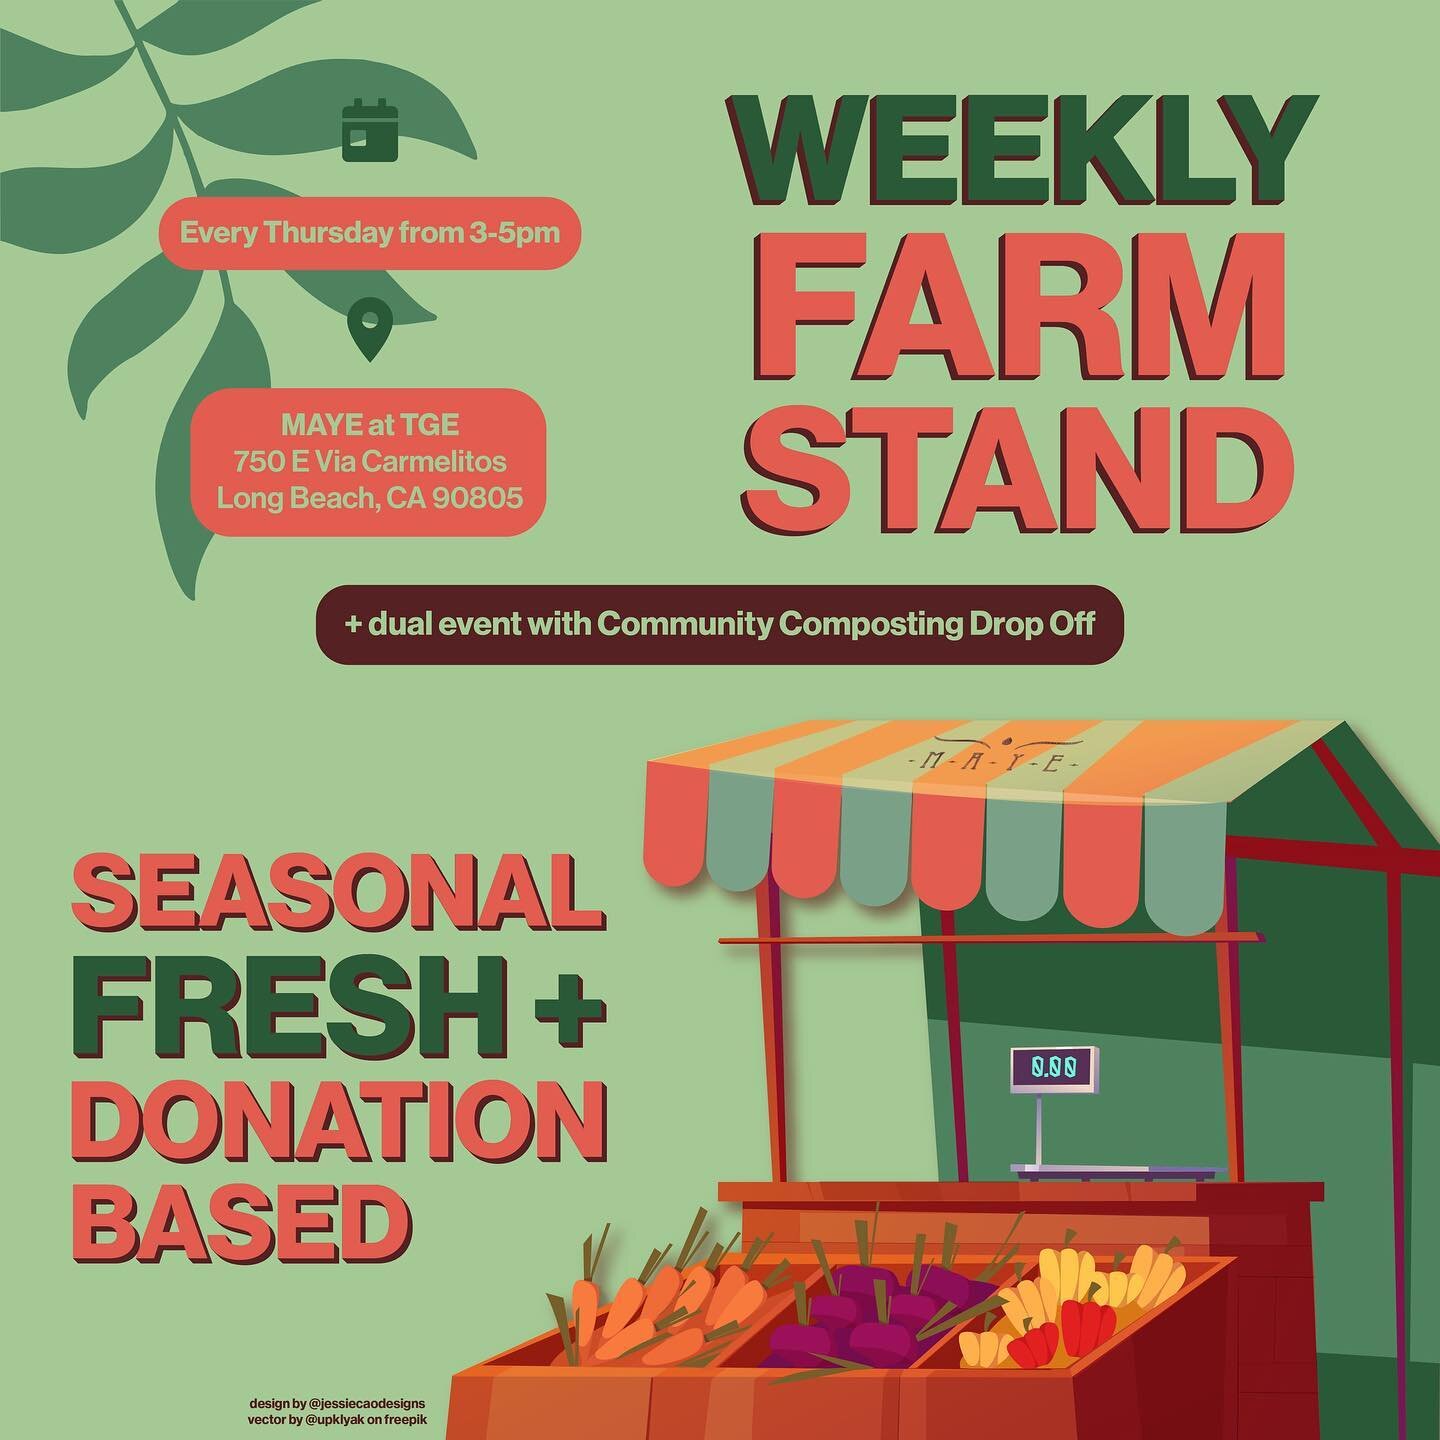 🧑&zwj;🌾 We are hosting a Weekly Farm Stand every Thursday from 3-5pm at the Growing Experience Urban Farm! (📍750 E Via Carmelitos, Long Beach, CA 90805)

🌽 The Farm Stand is donation-based. We offer seasonal fresh produce directly from the farm.
